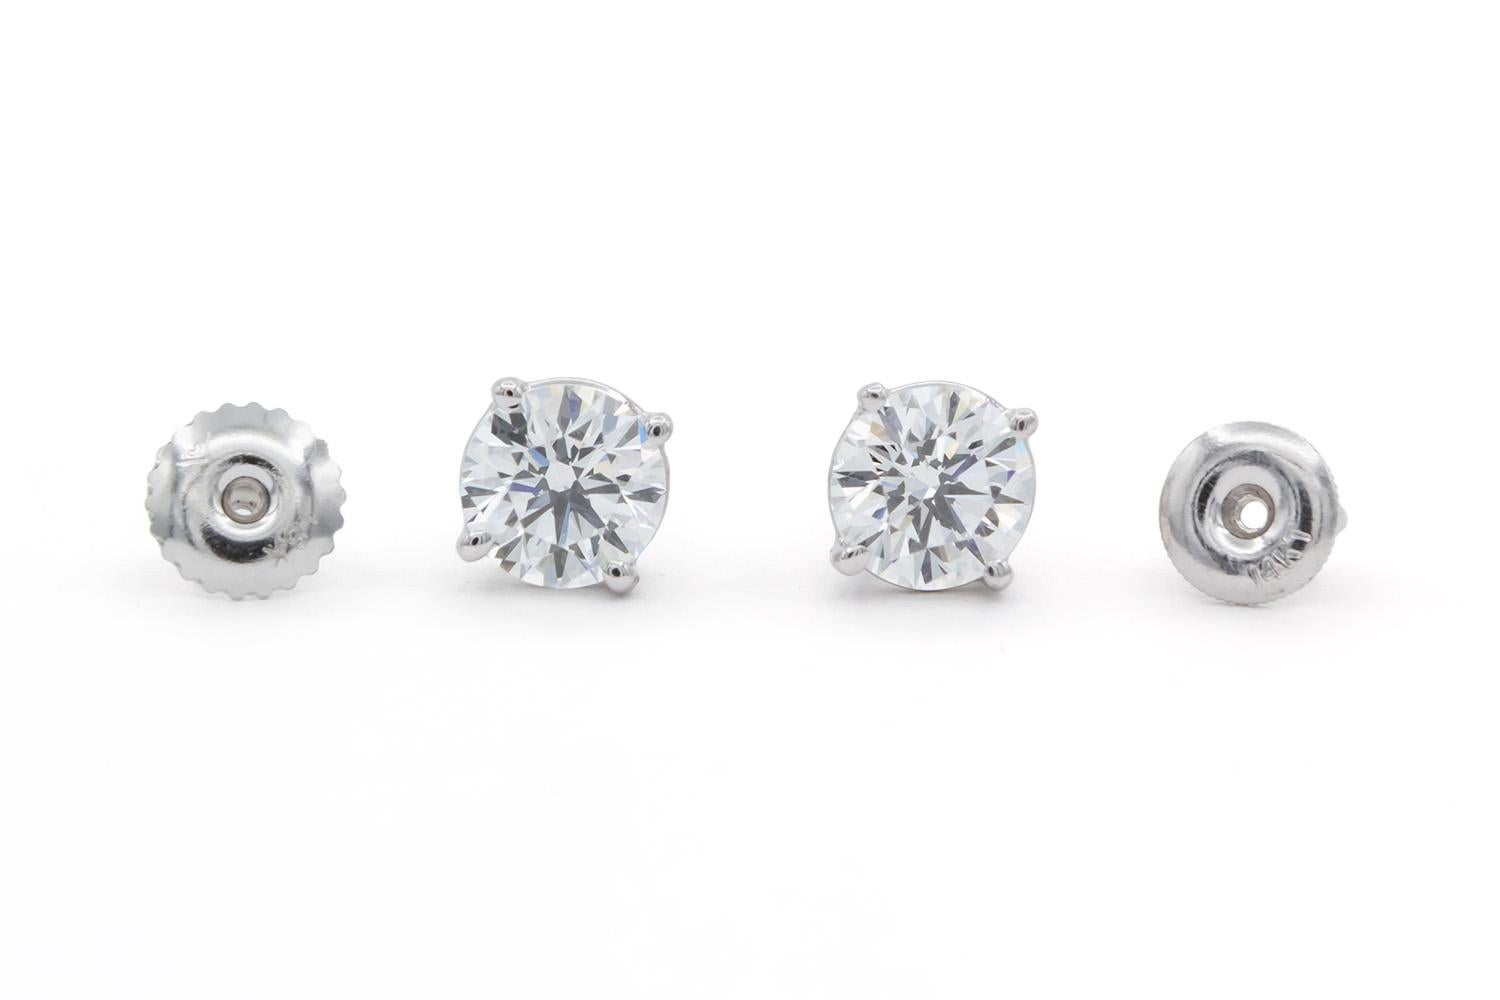 We are pleased to present these 14K White Gold & Diamond Stud Earrings. These beautiful set of stud earrings feature 1.80ctw E-F/VS1-VS2 Round Brilliant Cut Diamonds set in 14k White Gold studs with screw back setting. The diamonds have lots of